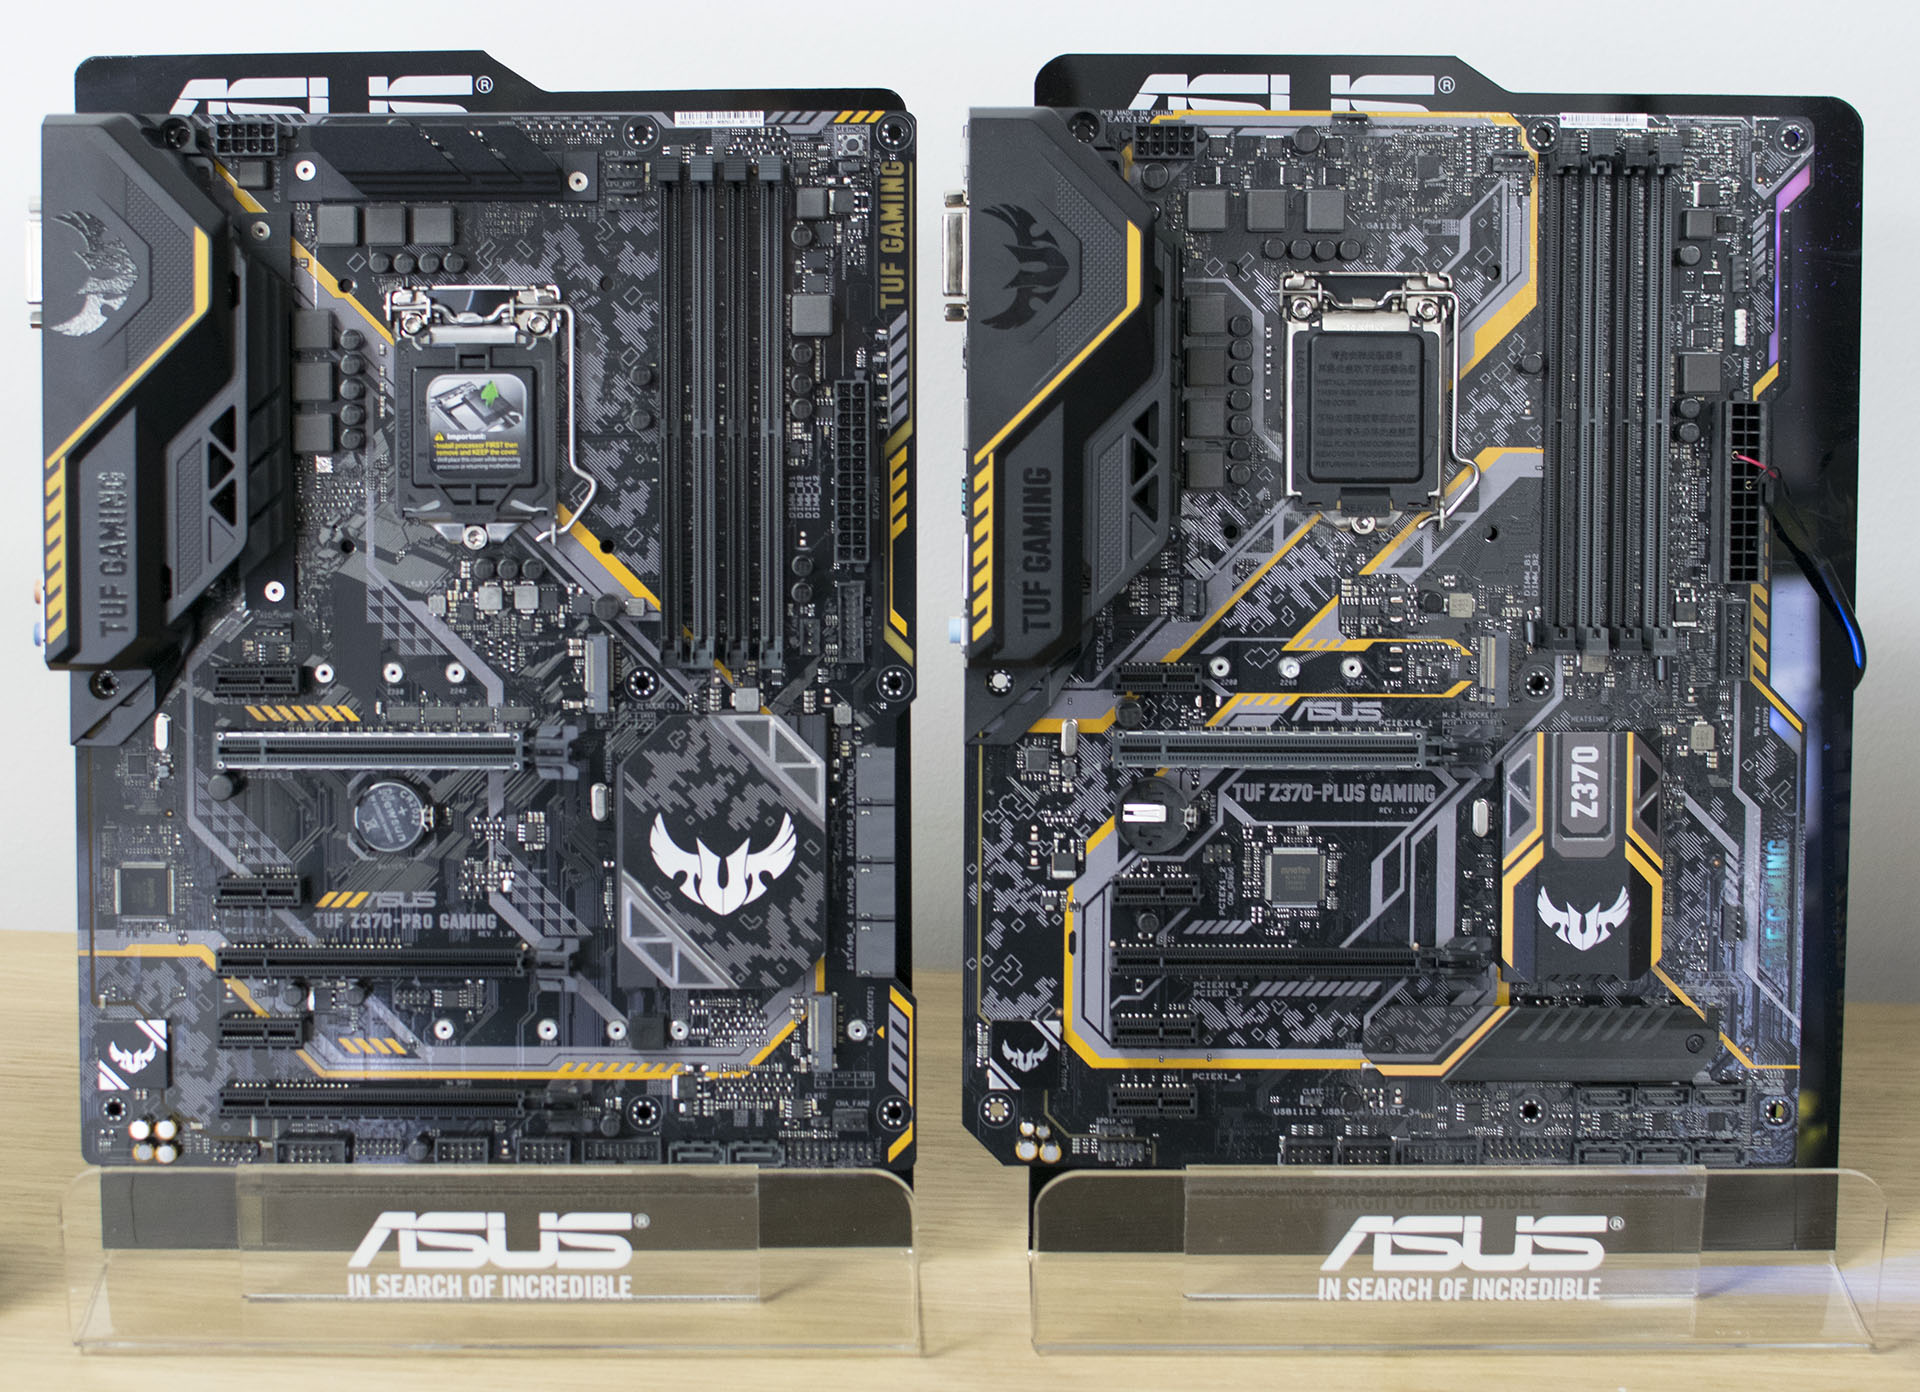 Asus Tuf Z370 Pro Gaming Z370 Plus Gaming Analyzing Z370 For Intel S 8th Generation Coffee Lake A Quick Look At 50 Motherboards